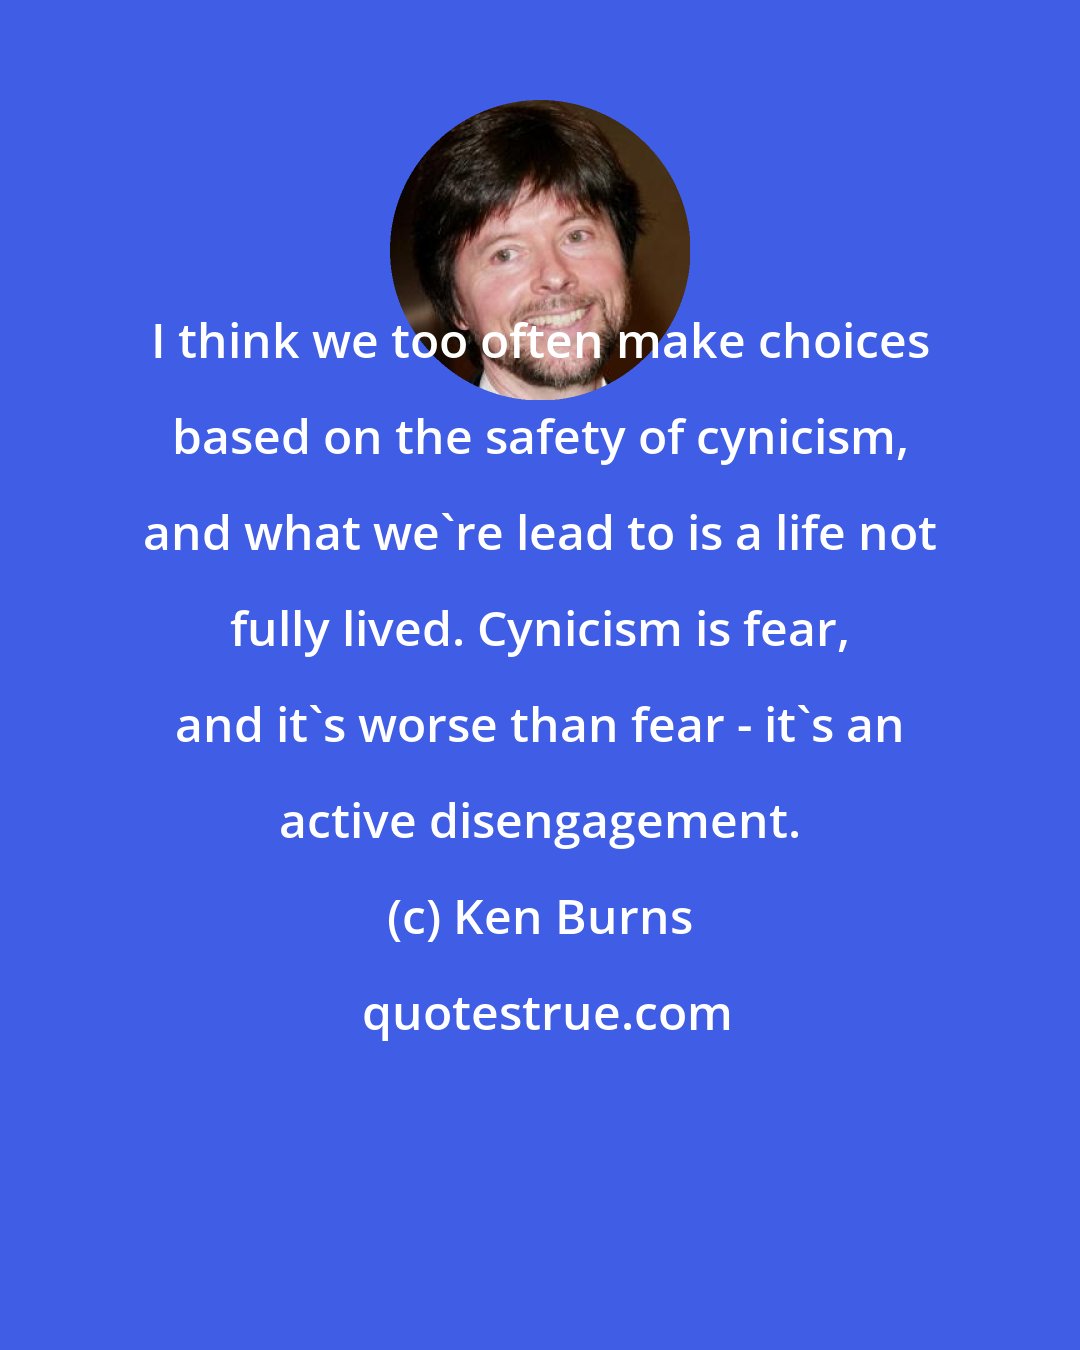 Ken Burns: I think we too often make choices based on the safety of cynicism, and what we're lead to is a life not fully lived. Cynicism is fear, and it's worse than fear - it's an active disengagement.